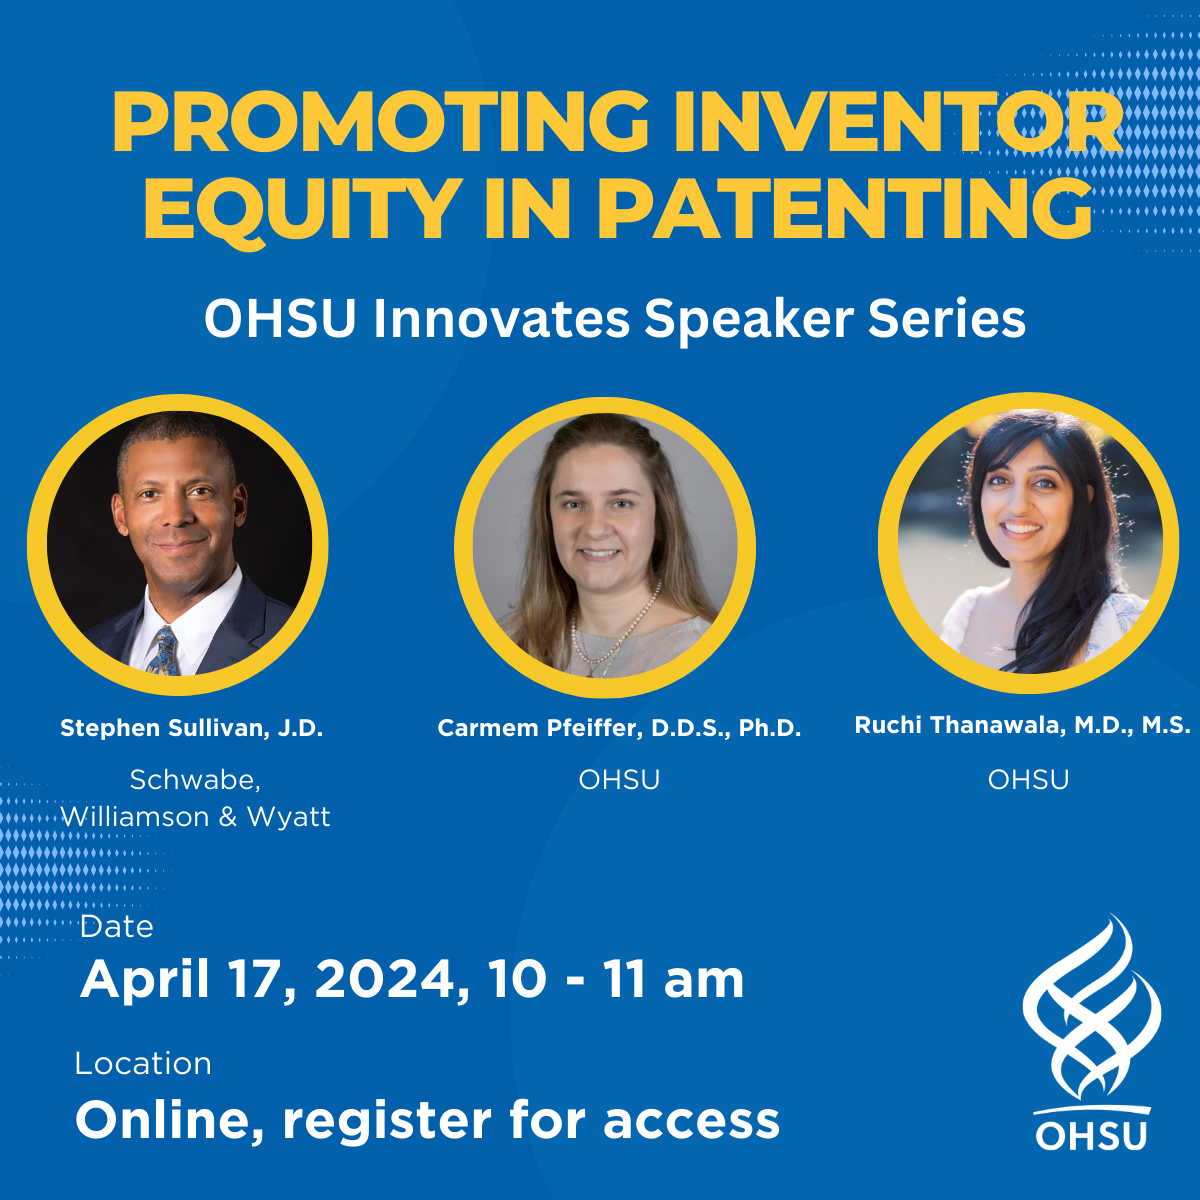 OHSU Innovates Speaker Series Poster displaying pictures of the three speakers and the event title: Promoting Inventor Equity in Patenting